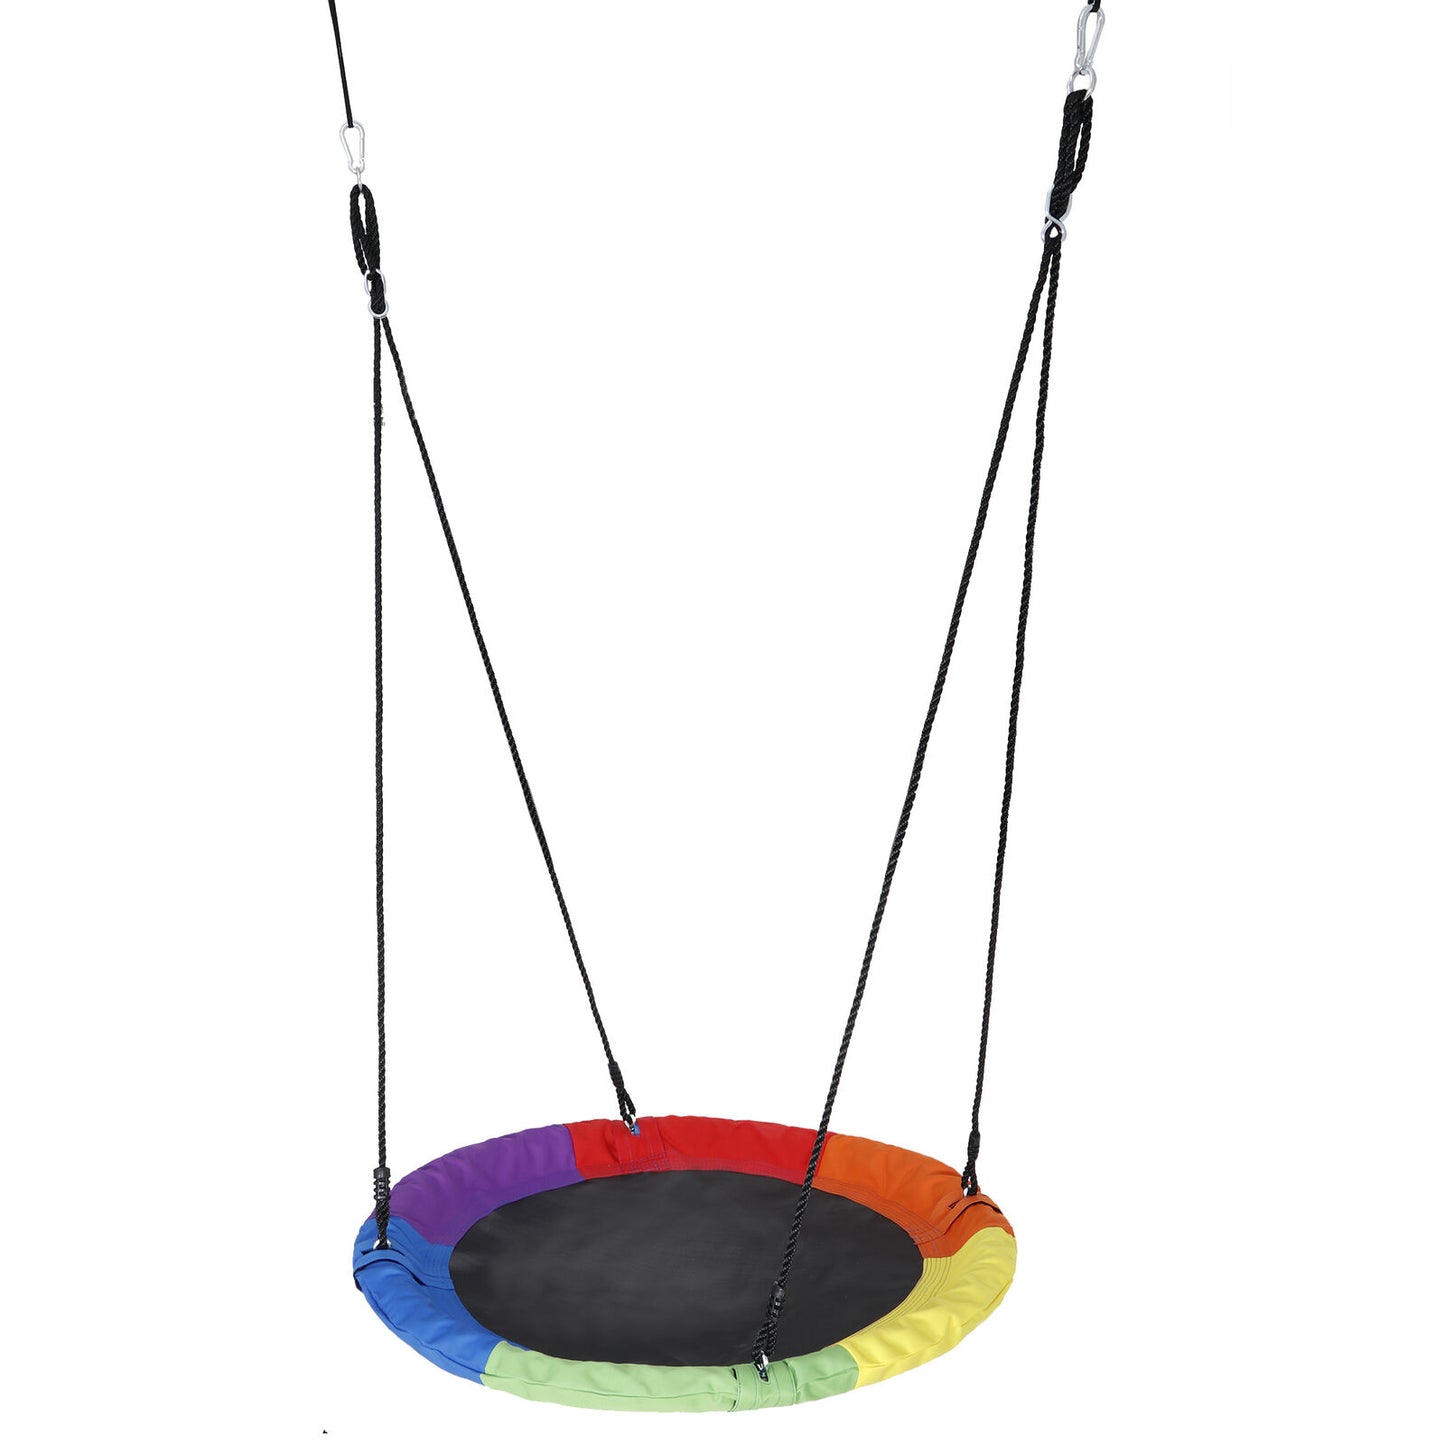 40" Detachable High Quality Tree Saucer Round Swing Seat Large Adjustable Rope